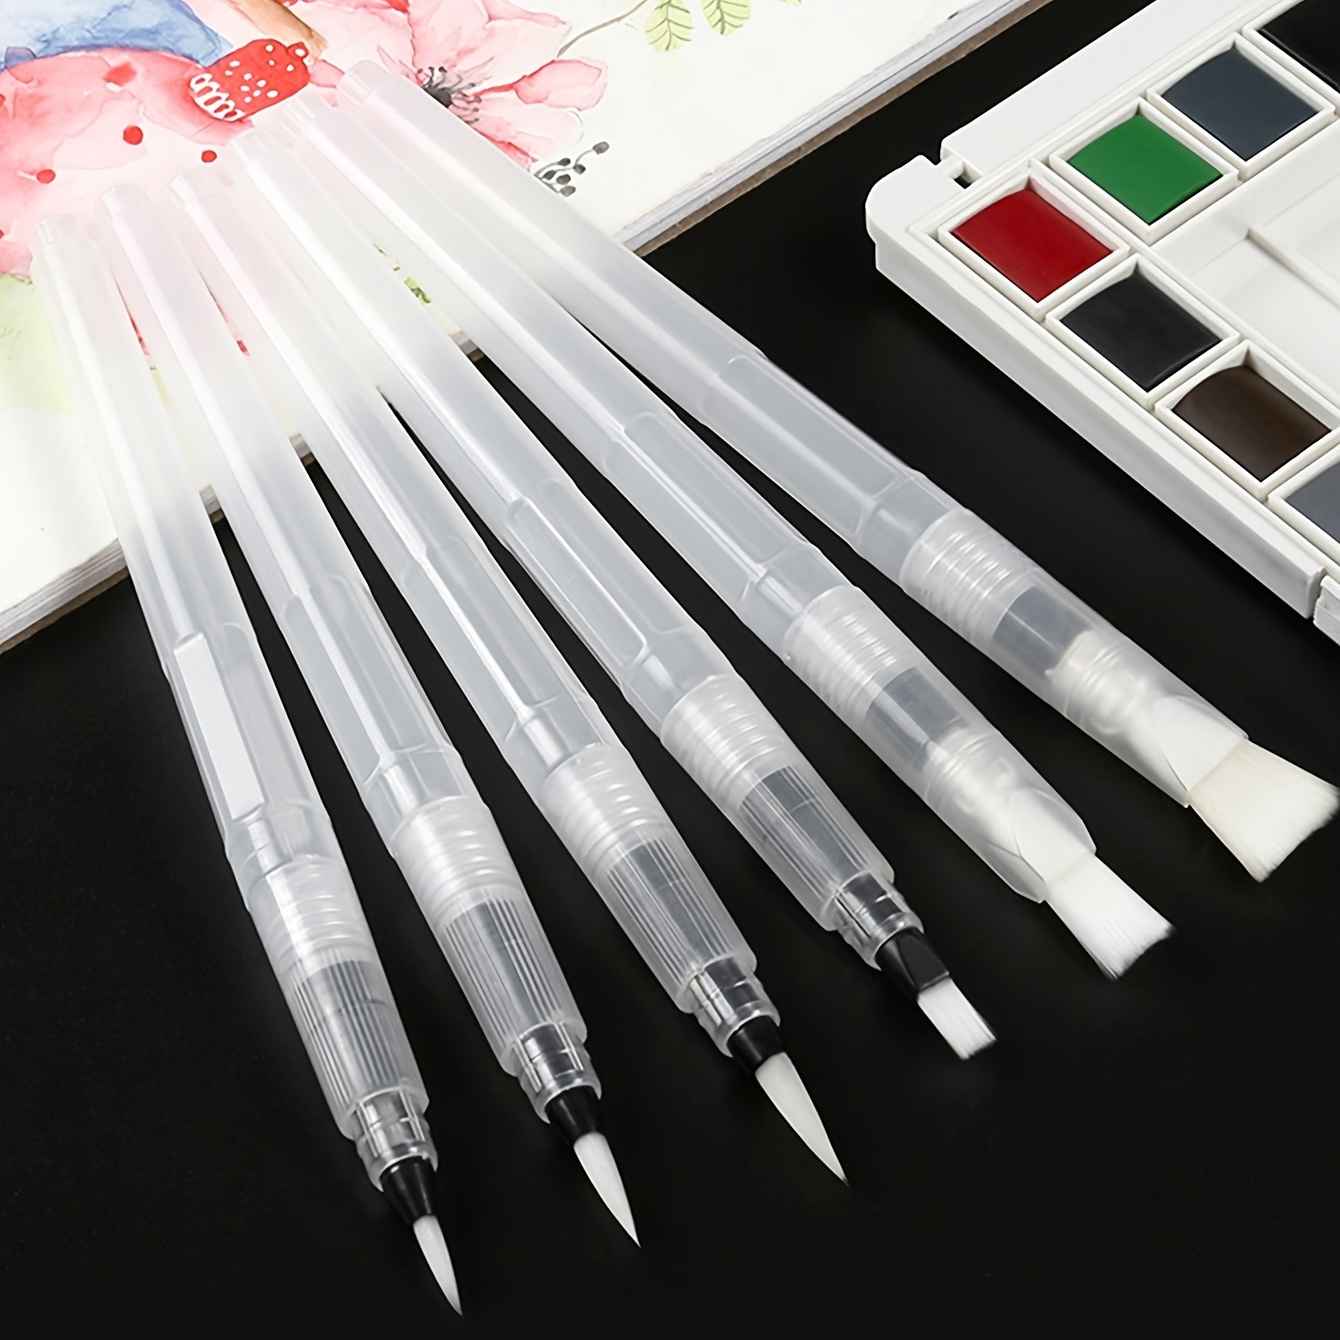 Ohuhu Fineliner Drawing Pens: 8 Sizes Fineliner Pens Pigment Black Ink  Micro Pens Assorted Point Sizes Waterproof for Writing Drawing Journaling  Sketching Anime Manga Watercolor Artists Beginners